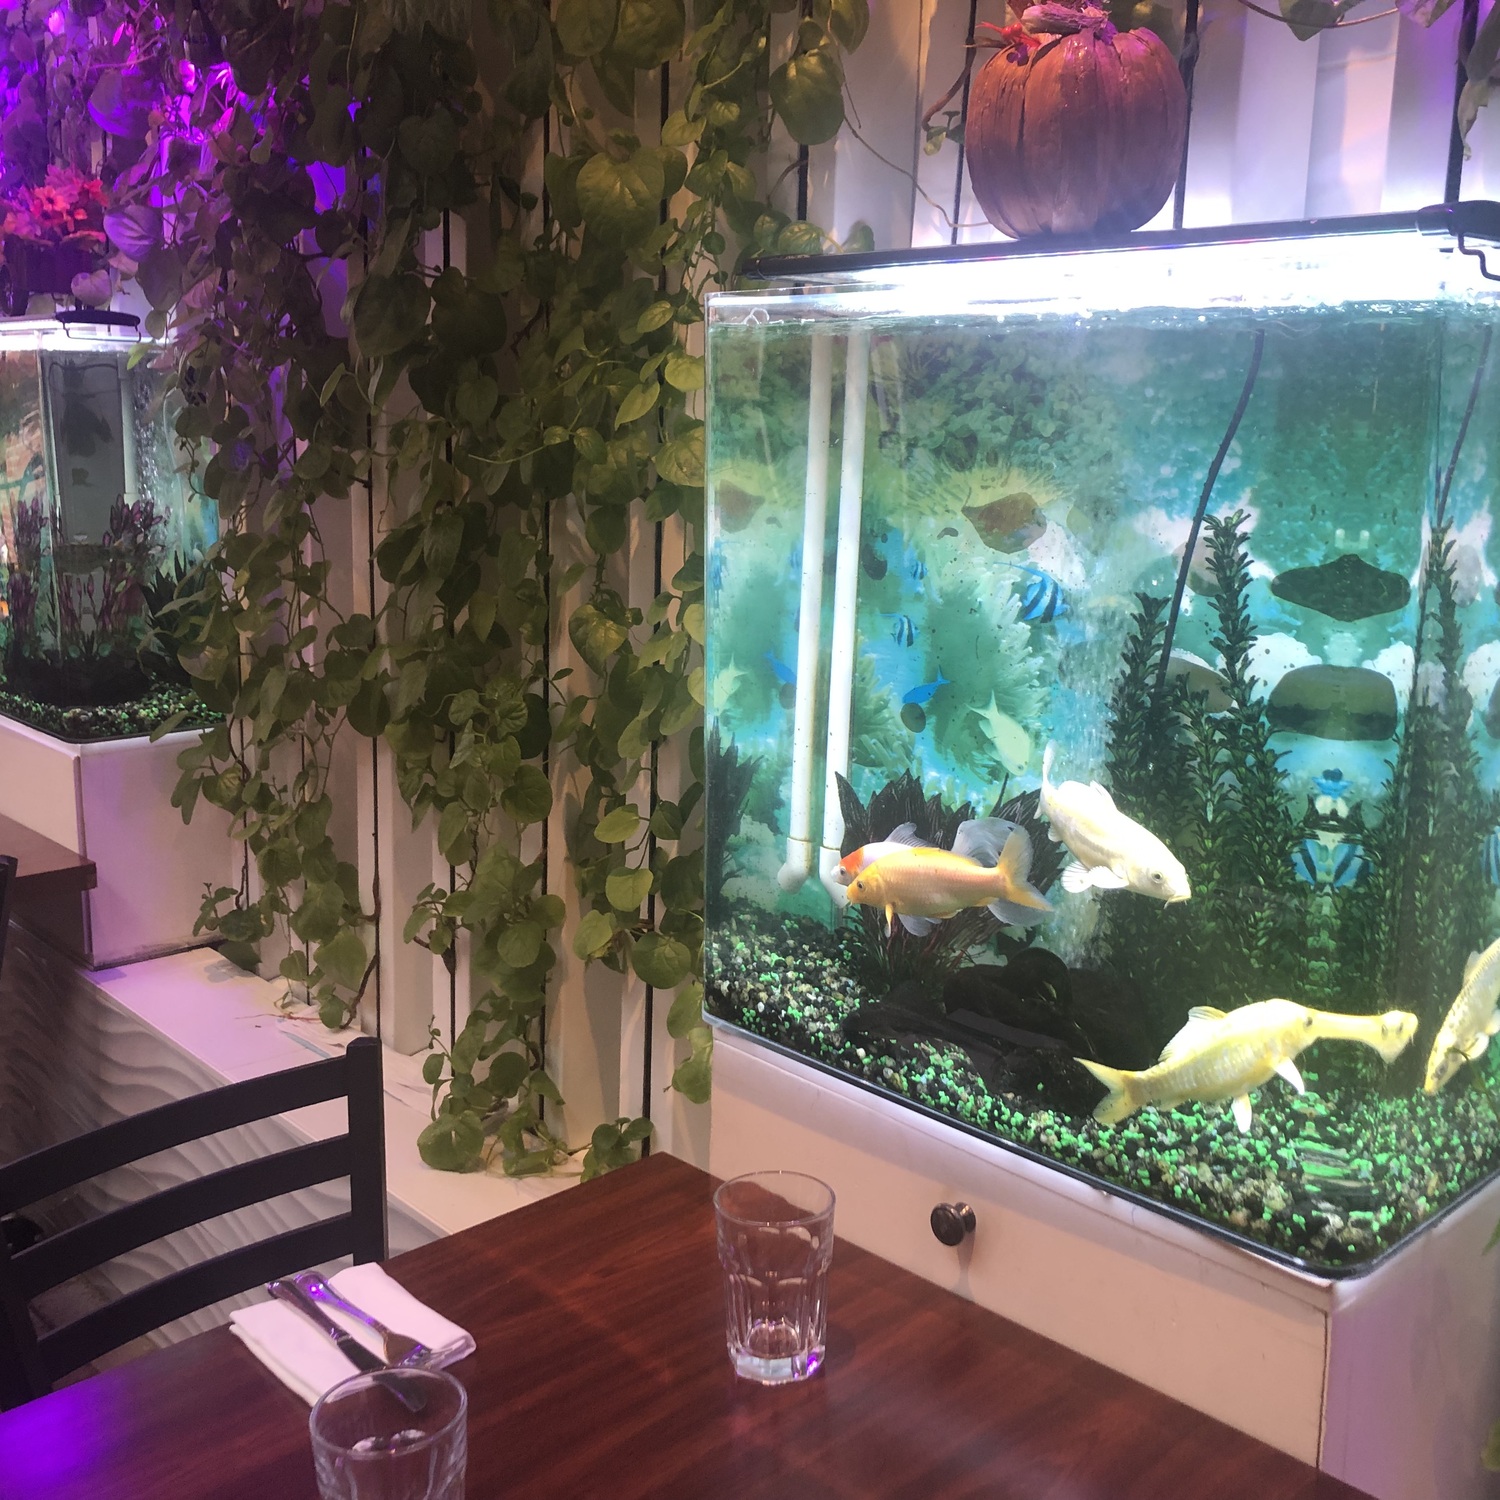 Page Restaurant in Sag Harbor gets creative using an Aquaponics System to filter water through their tropical fish tanks to feed this spinach-covered wall, and micro-greens such as basil, mint and baby kale.  JENNY NOBLE